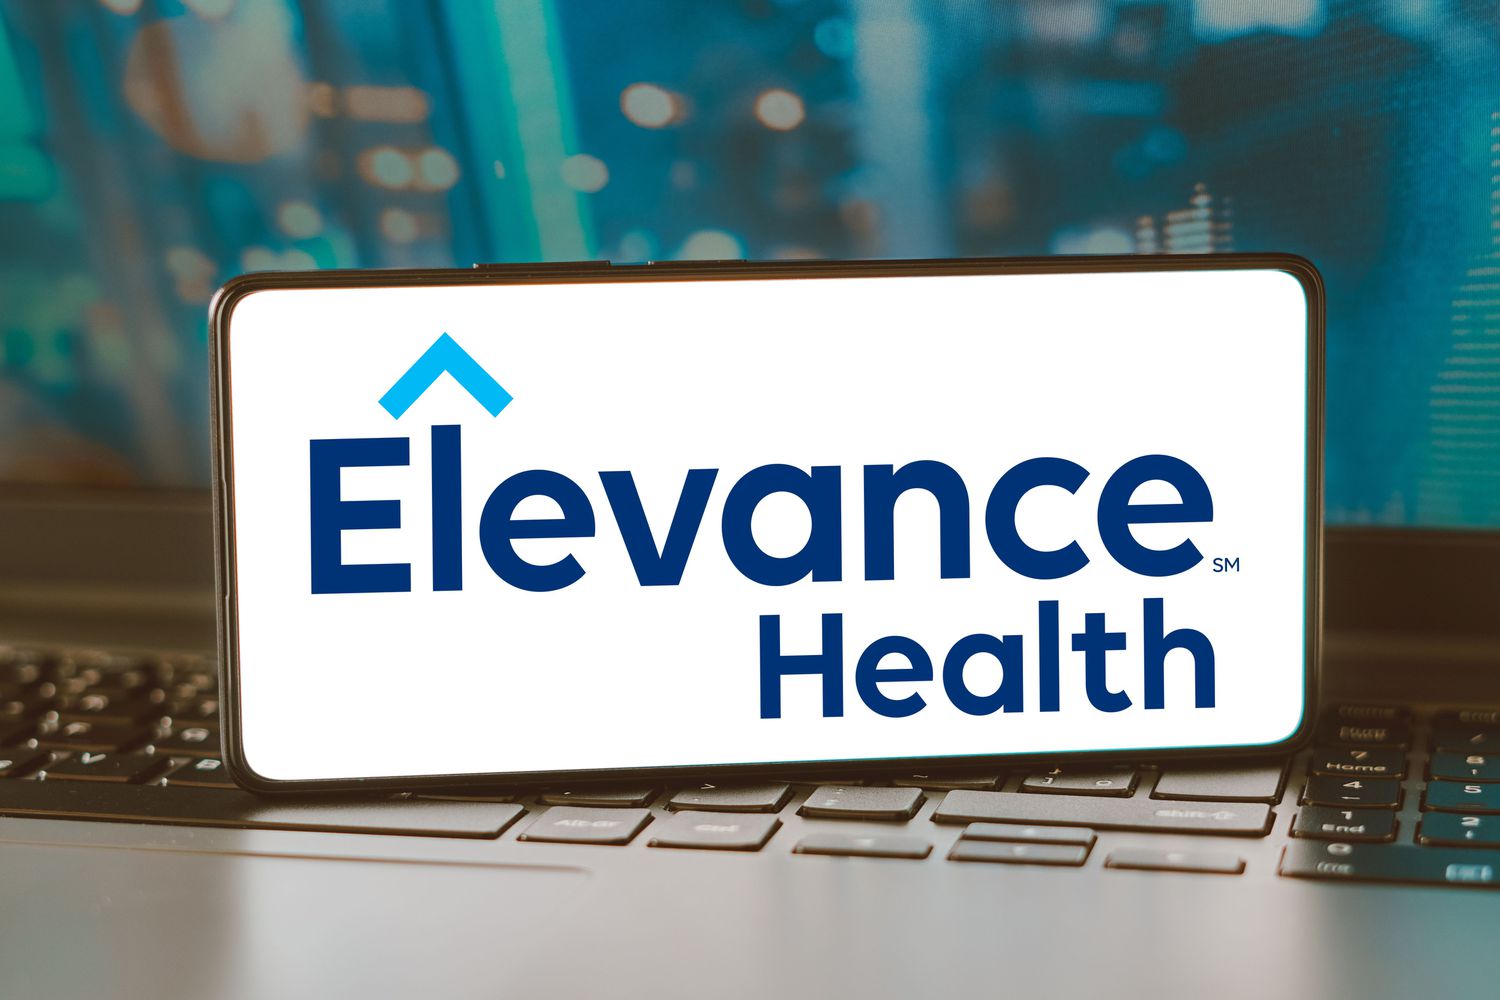 Elevance Health Stock Rises After Earnings Top Expectations, Guidance Boosted [Video]